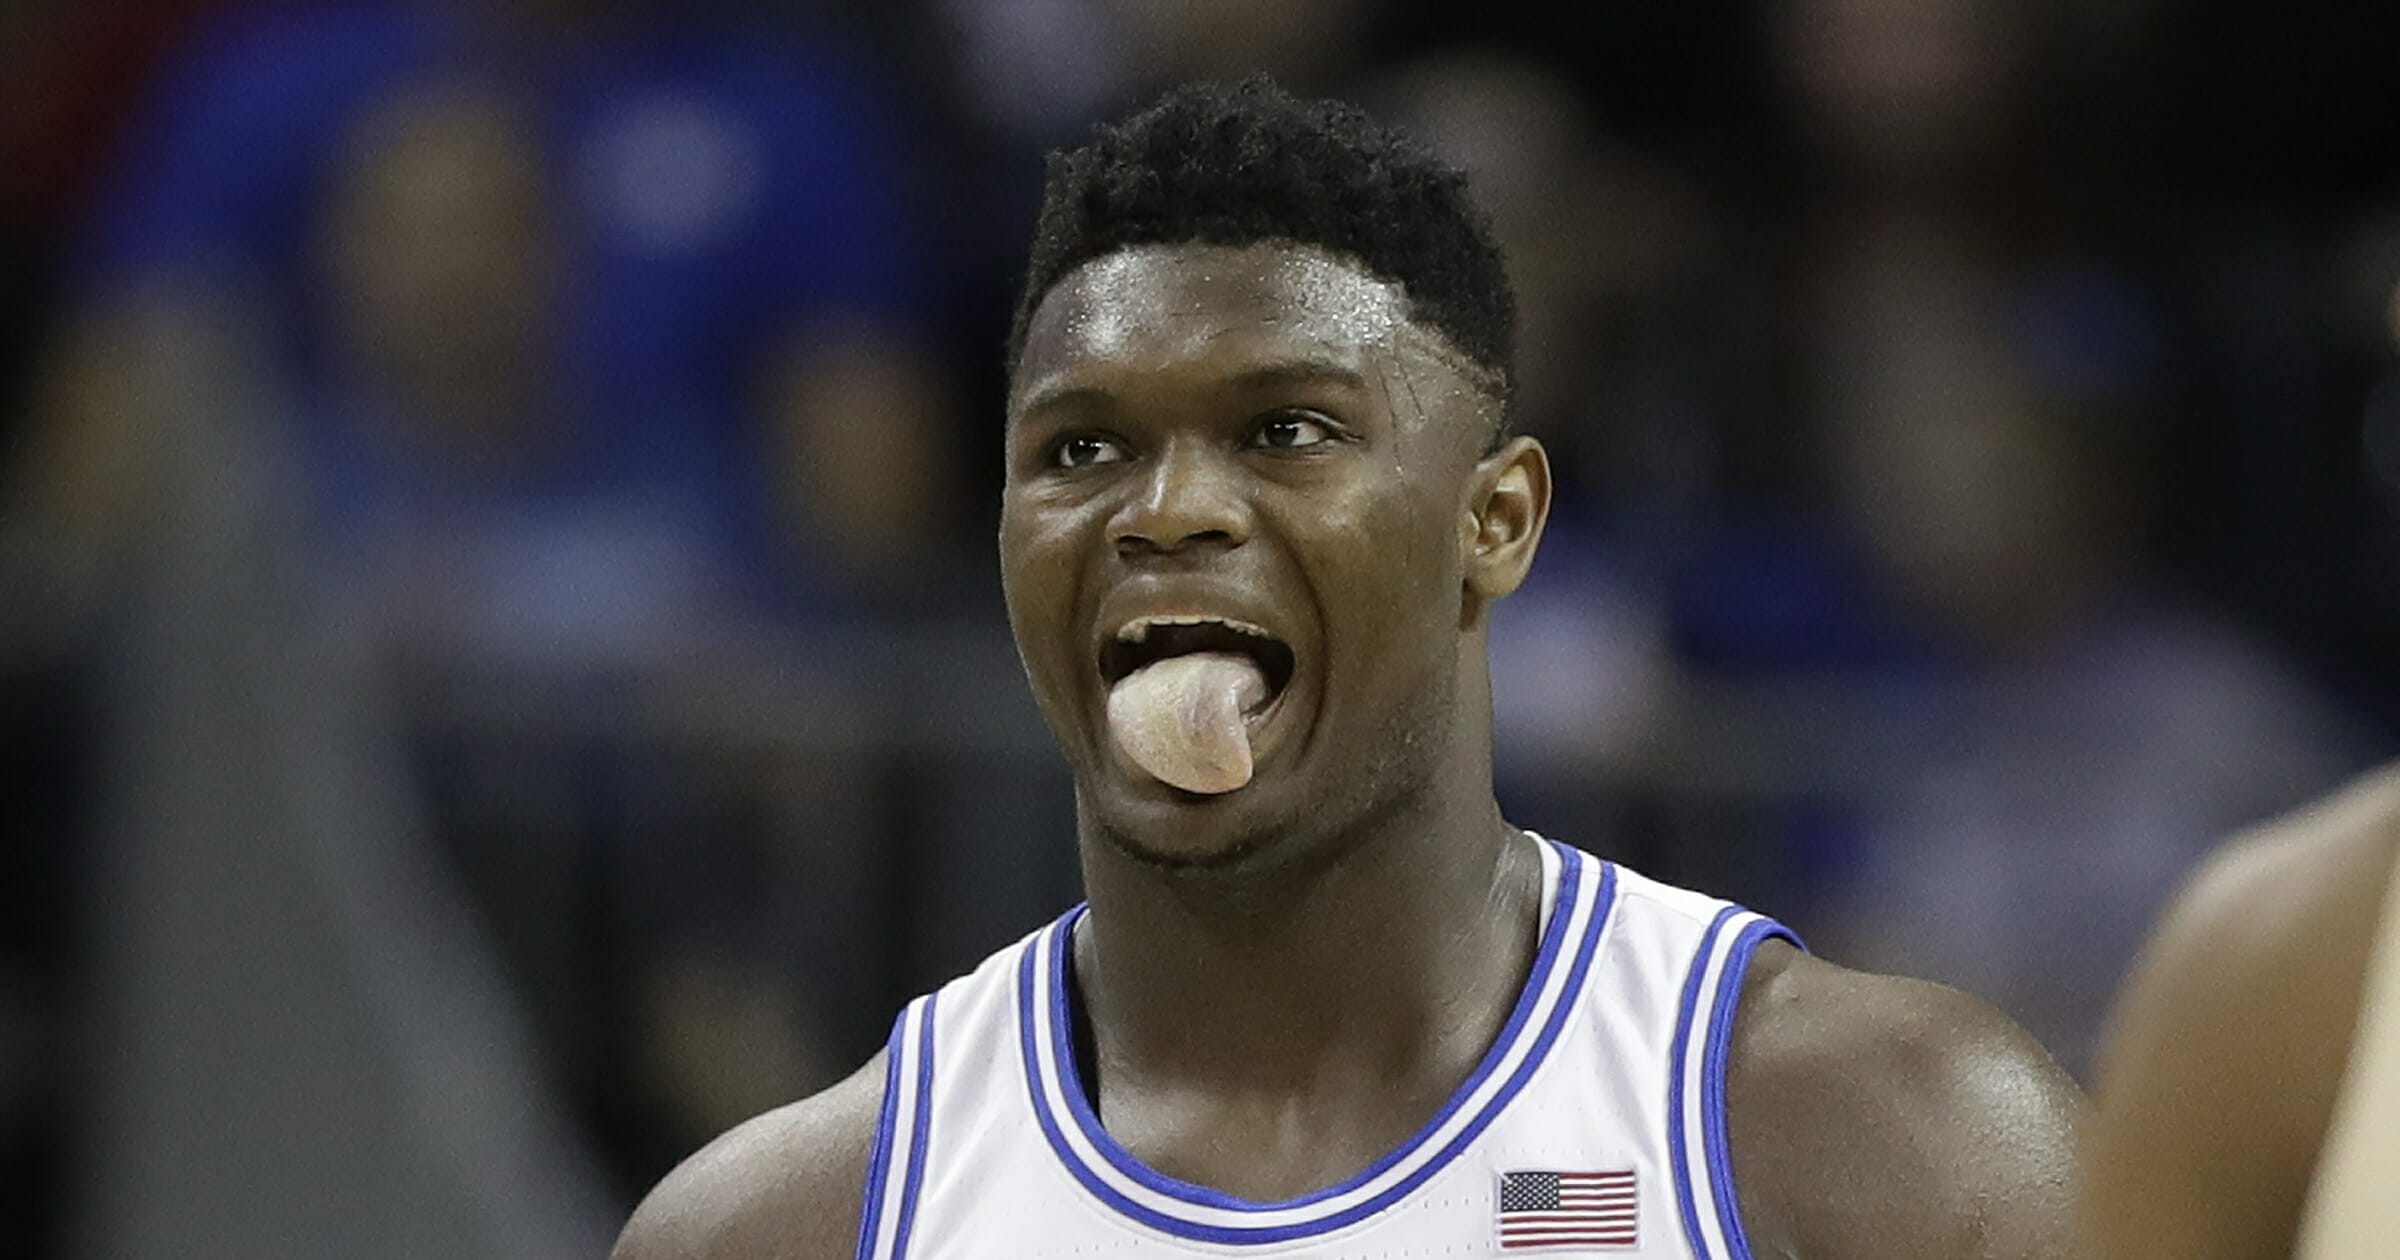 Duke's Zion Williamson reacts during the second half against Florida State in the NCAA college basketball championship game of the Atlantic Coast Conference tournament in Charlotte, N.C., Saturday, March 16, 2019.